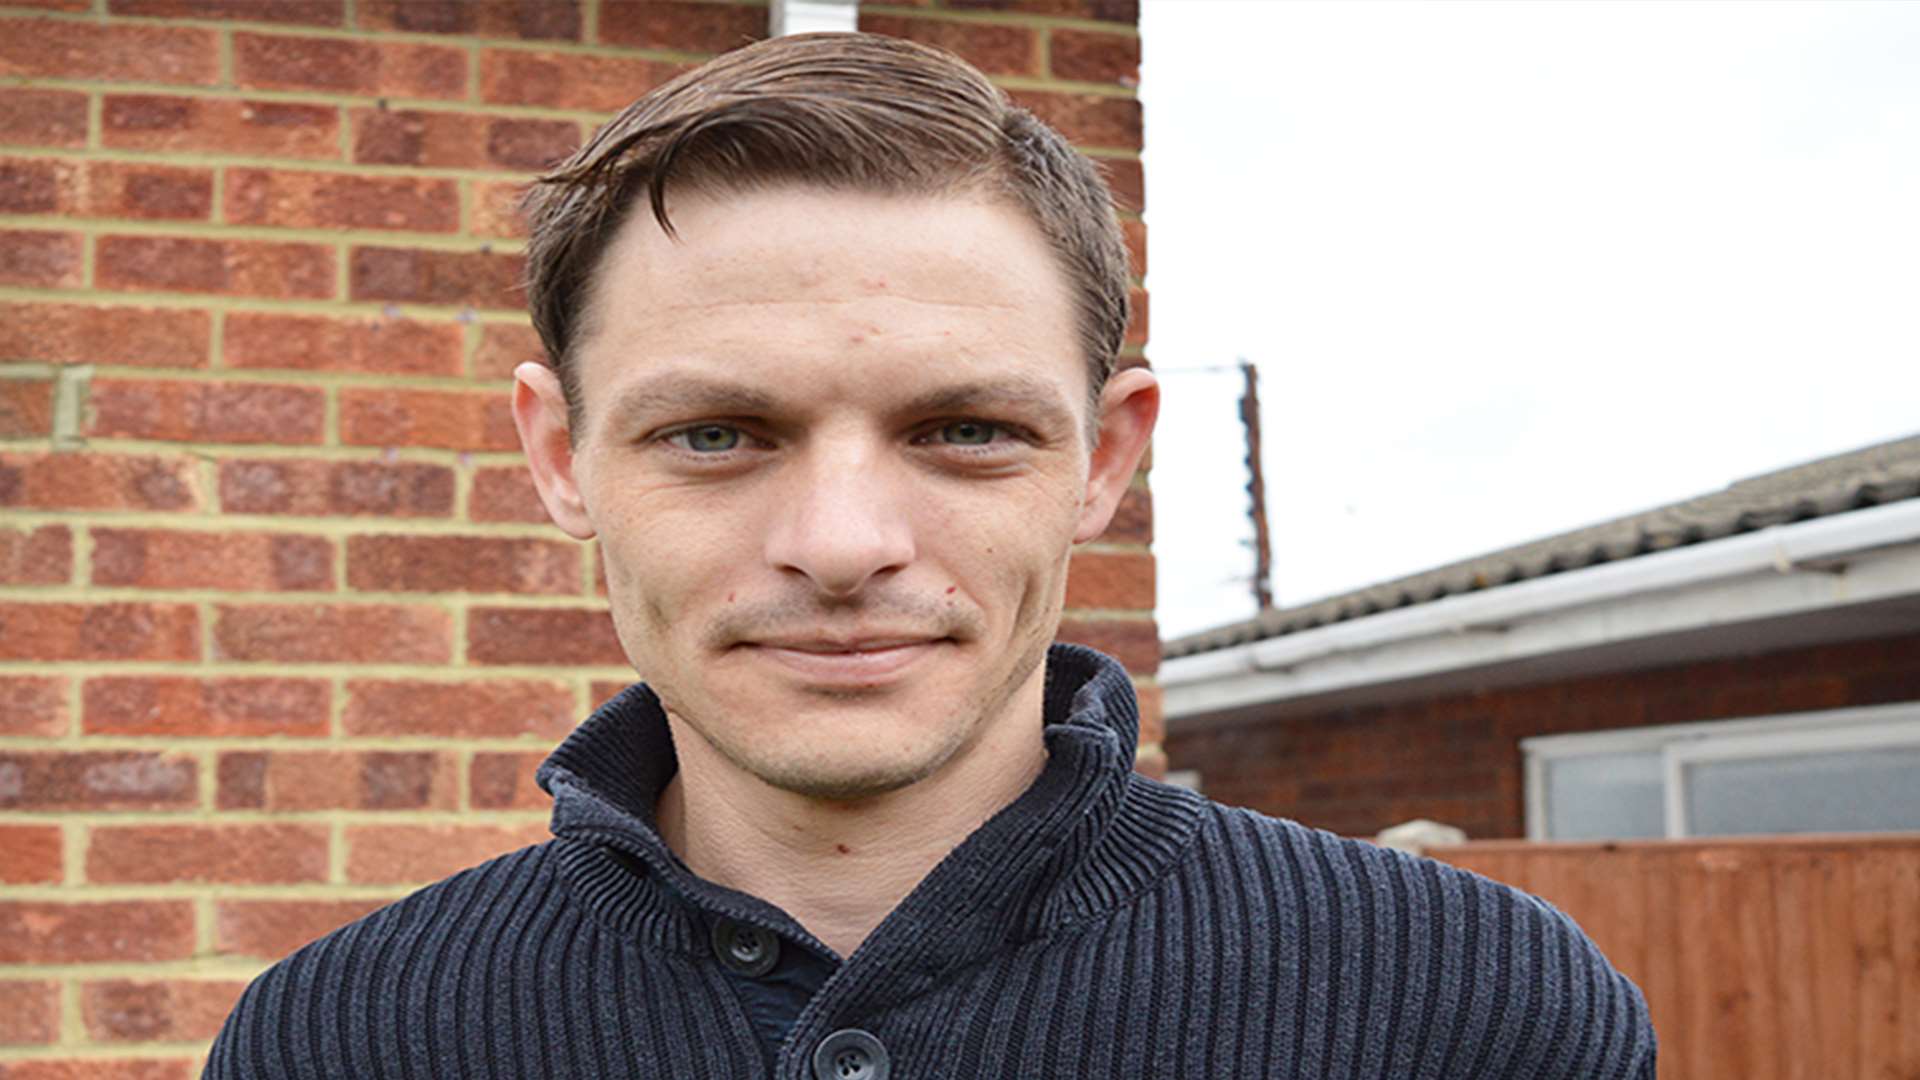 Daryl was sleeping rough for six months before getting help from the charity